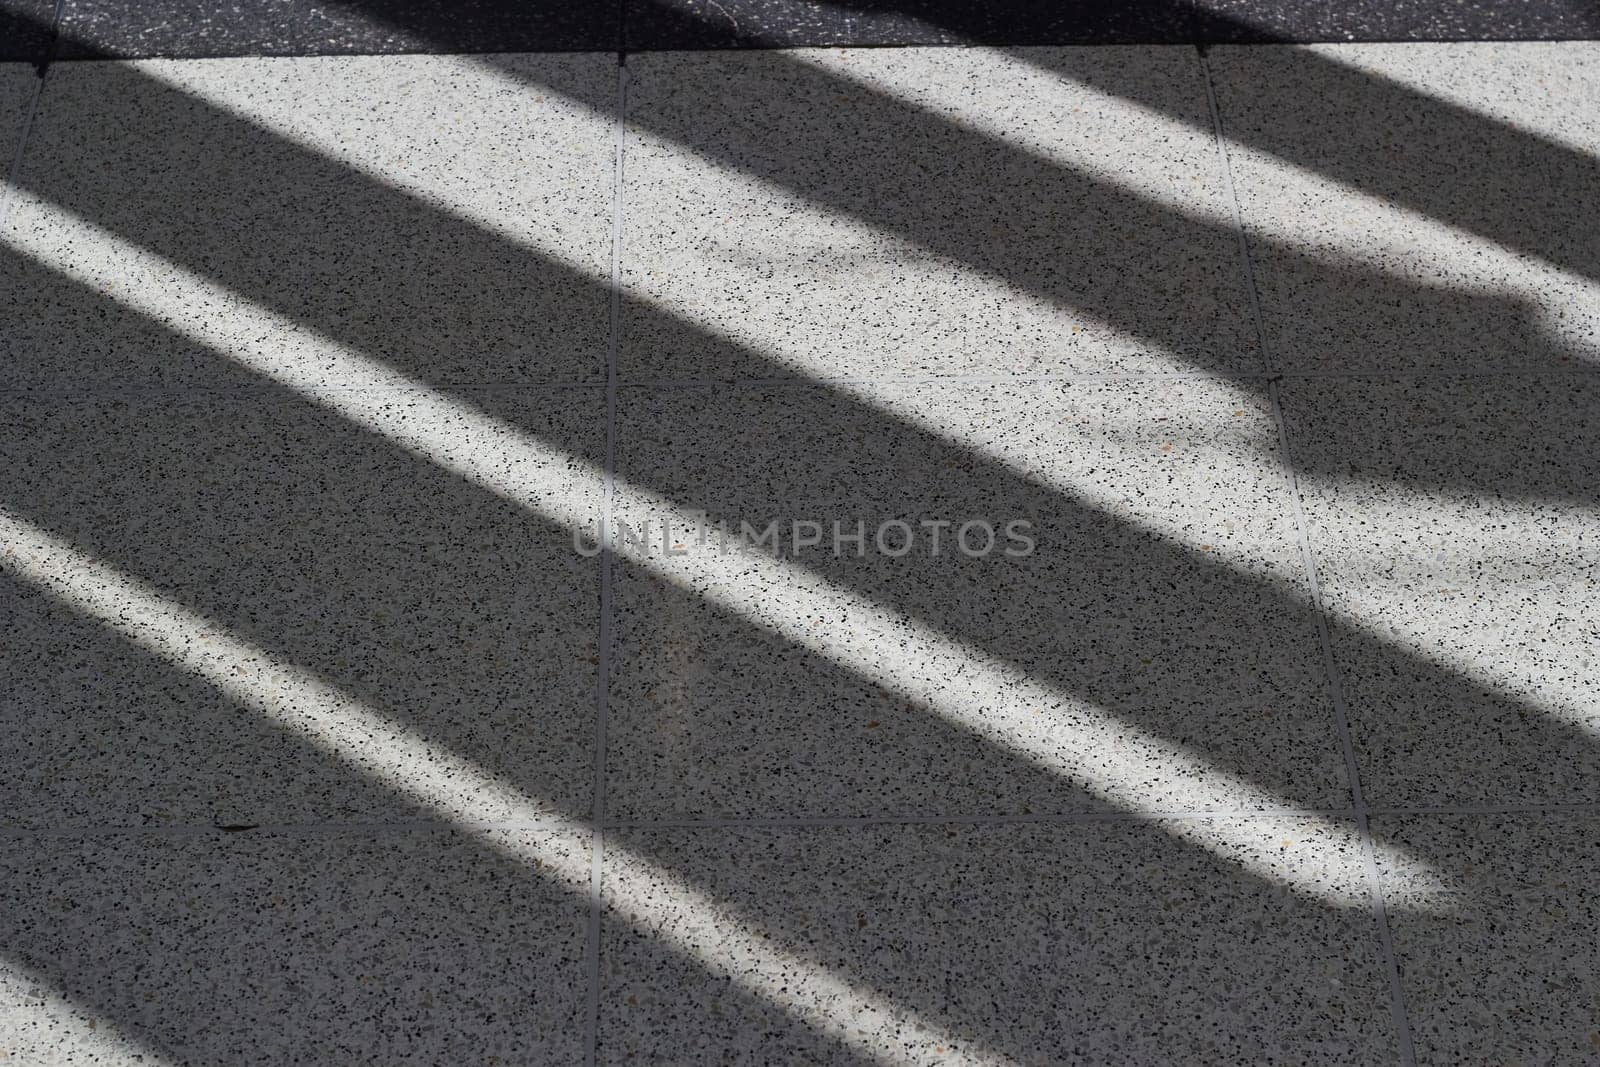 Abstract background diagonal shadows on the floor. White and black image.